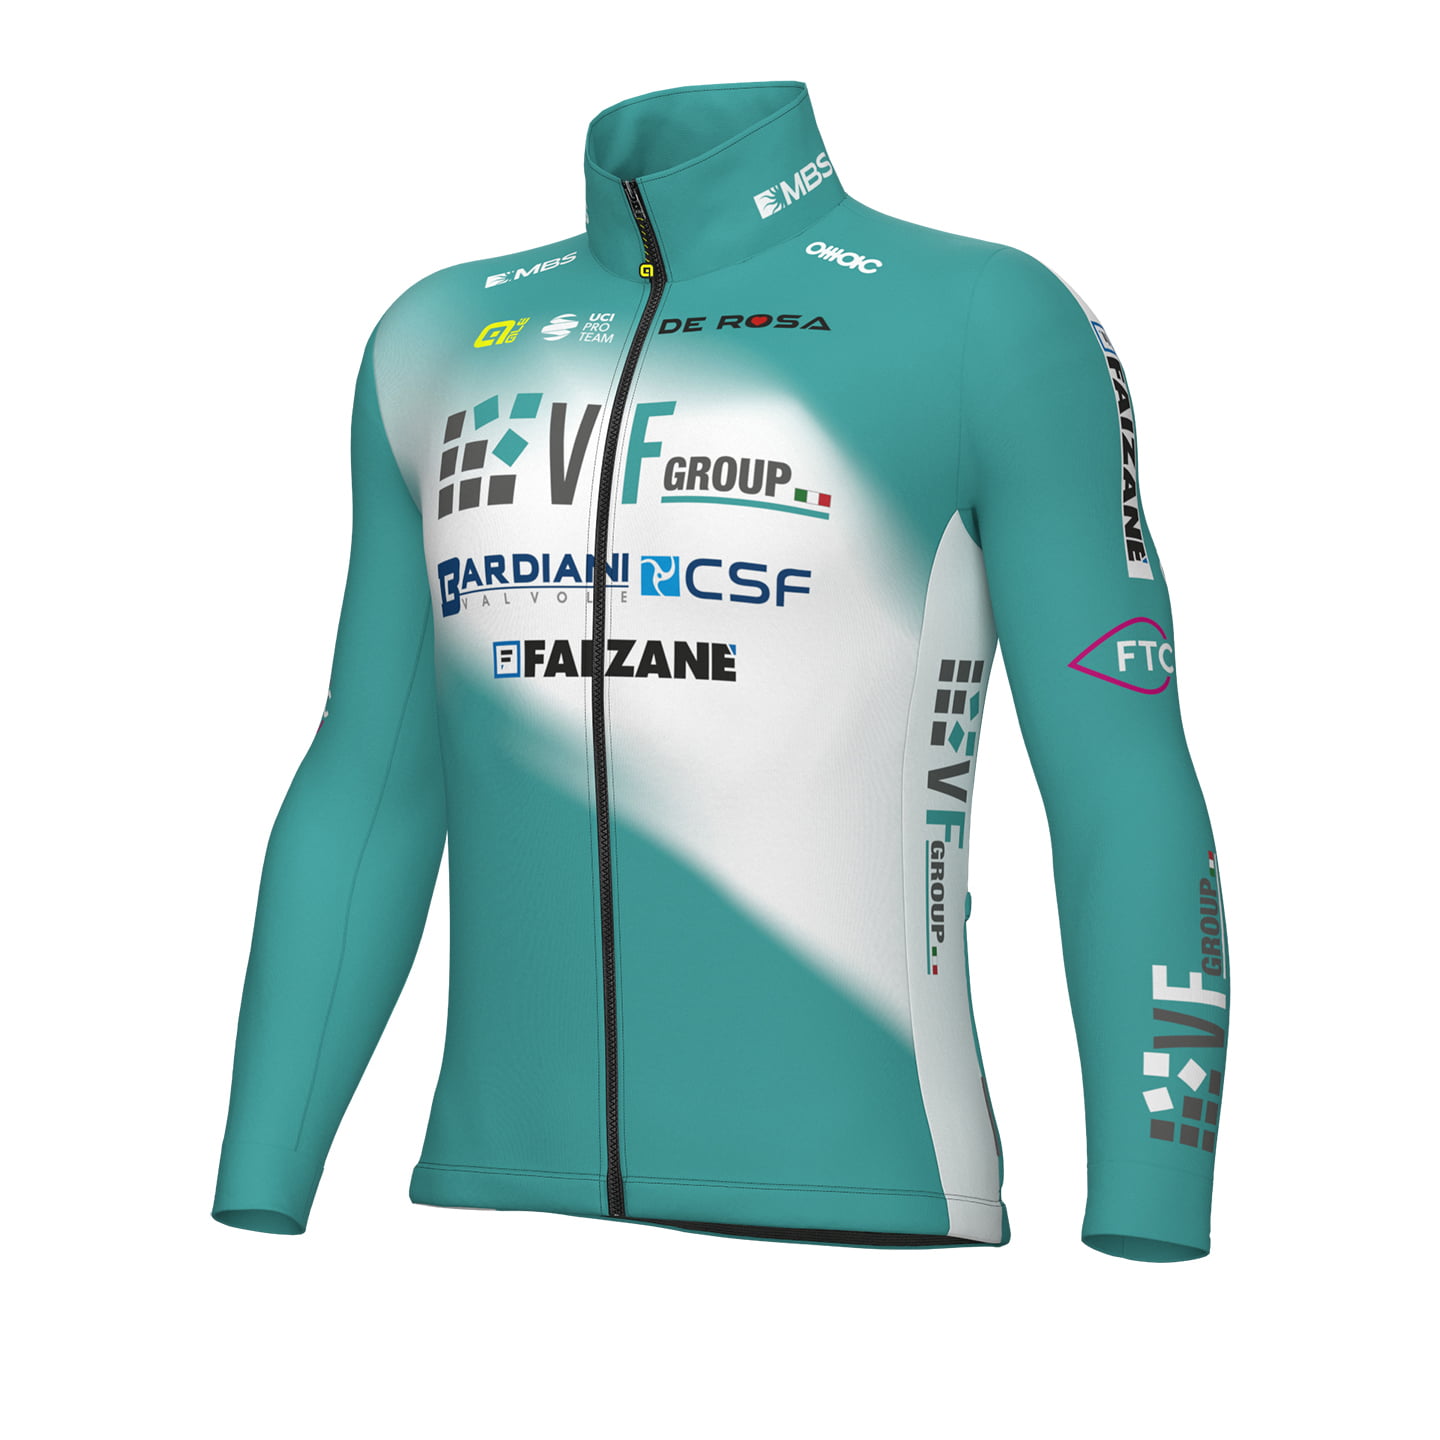 VF GROUP-BARDIANI CSF-FAIZANE 2024 Thermal Jacket, for men, size S, Winter jacket, Cycling clothing